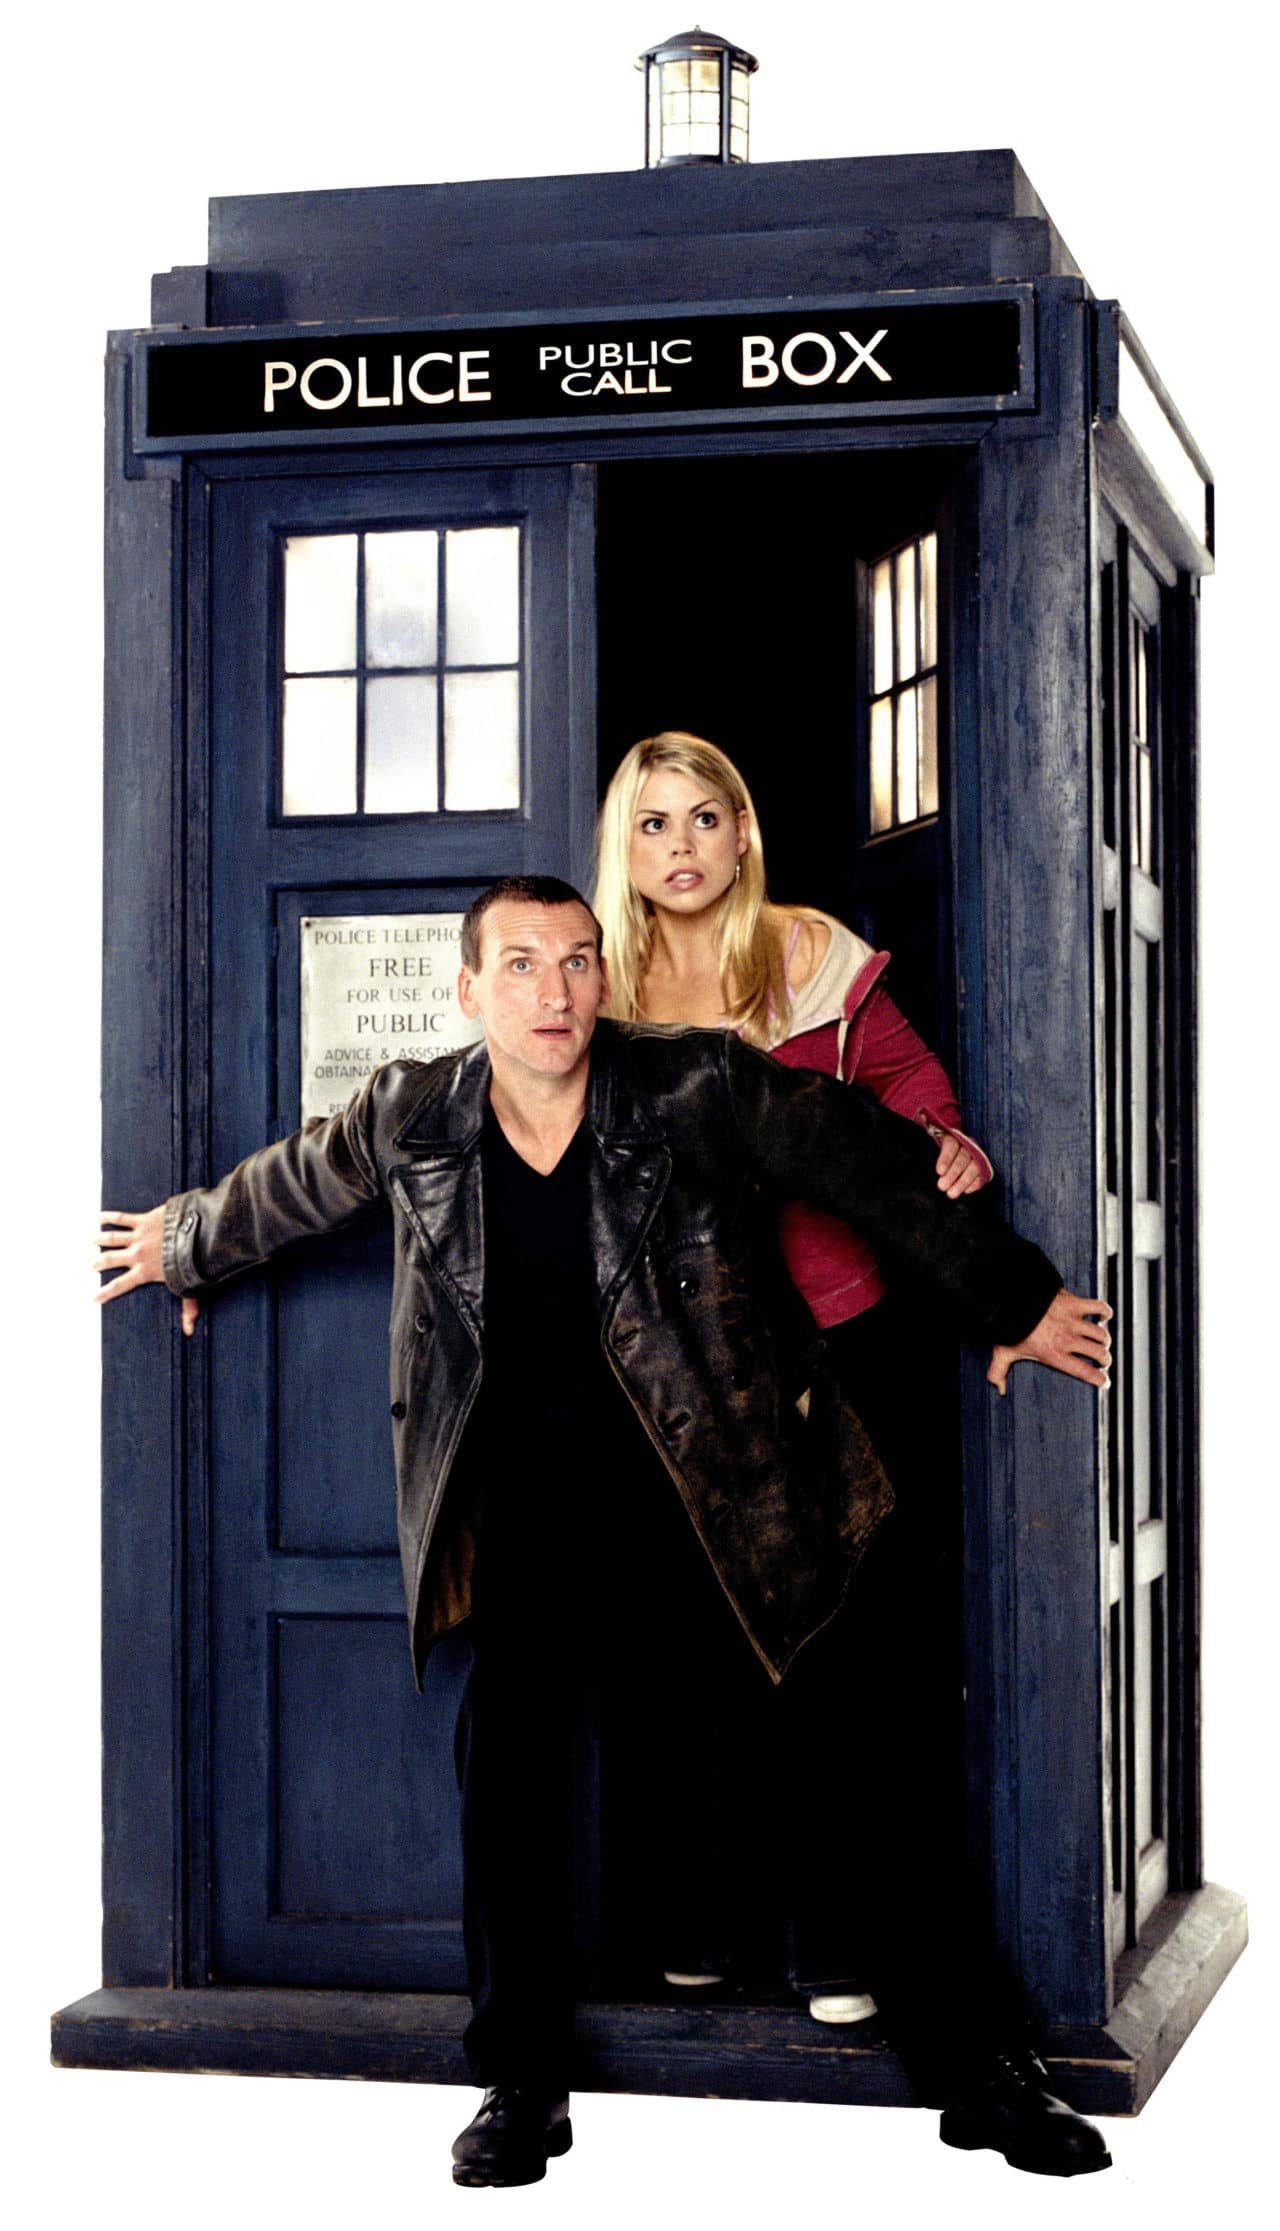 Doctor Who diaries, Rewatching 2014's Rose, Behind-the-scenes anecdotes, Nostalgic journey, 1280x2240 HD Handy